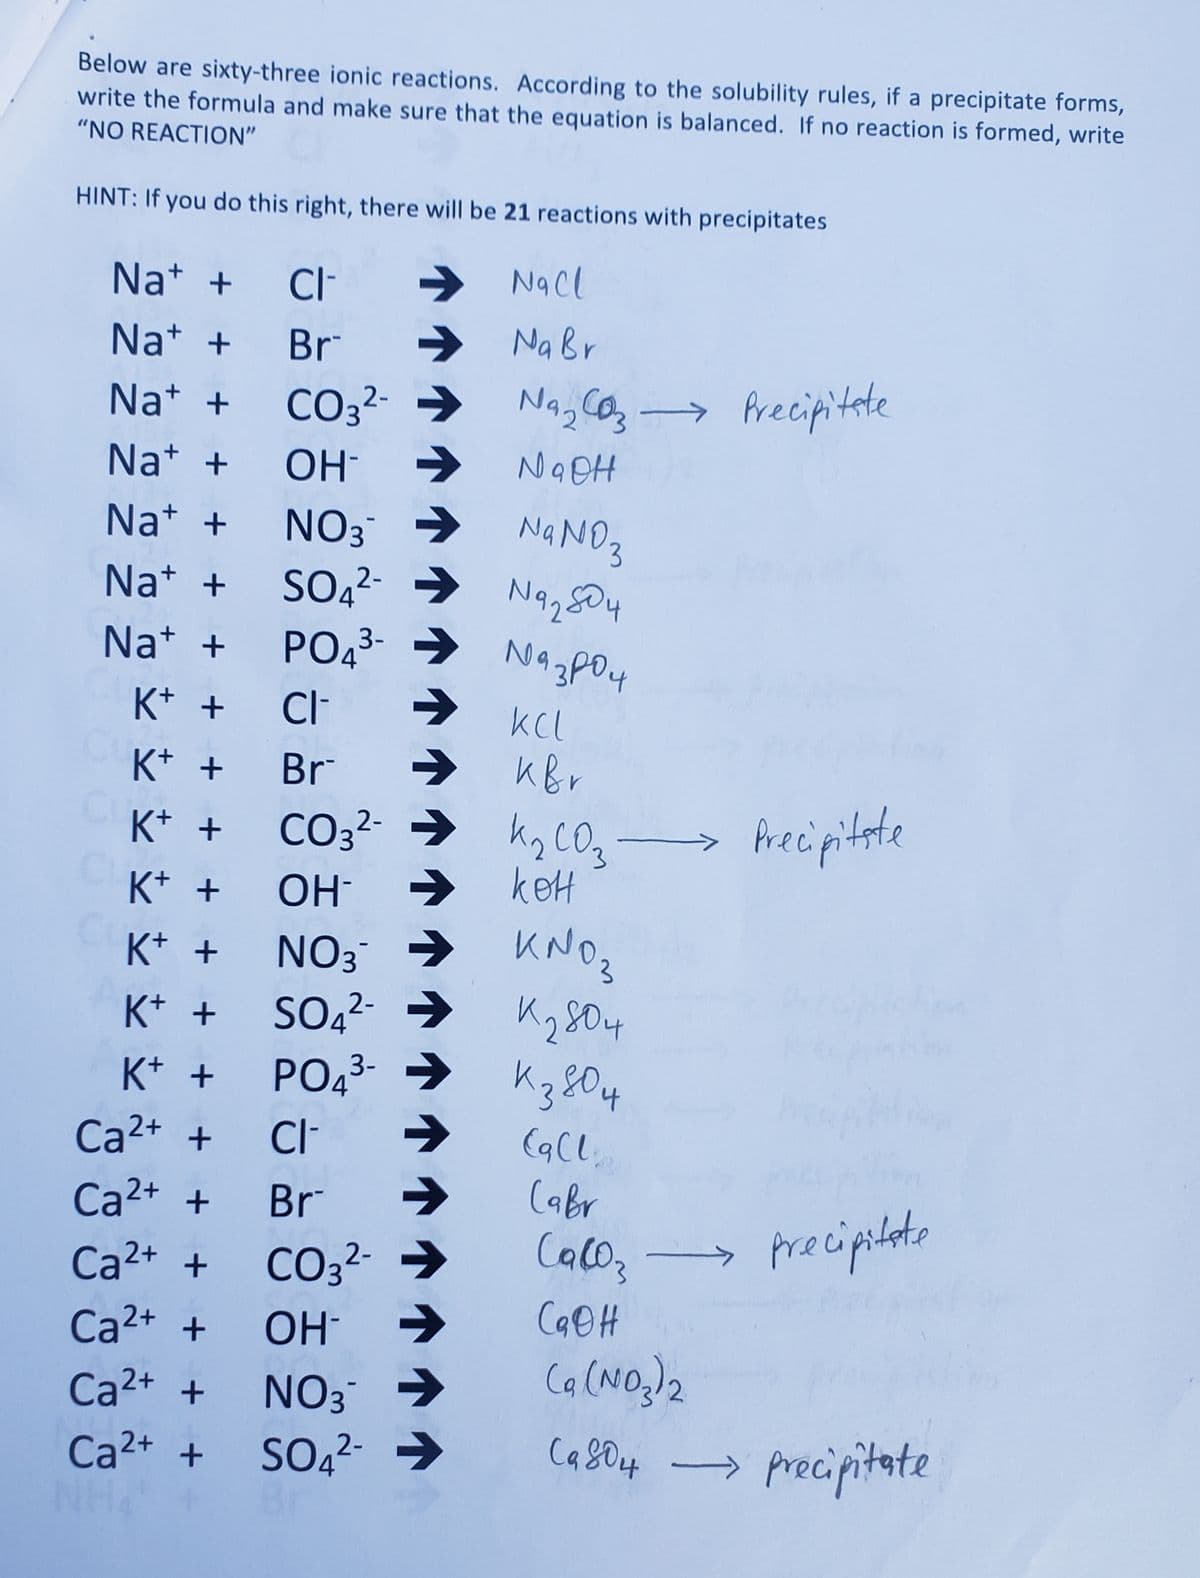 Below are sixty-three ionic reactions. According to the solubility rules, if a precipitate forms,
write the formula and make sure that the equation is balanced. If no reaction is formed, write
"NO REACTION"
HINT: If you do this right, there will be 21 reactions with precipitates
Na+ + CI-
NaCl
Na+ +
Br
➜ Na Br
Na+ +
CO3²- → Na₂CO3 → Precipitate
2-
Na+ +
NaOH
Na+ +
Na+ +
Na+ +
K+ +
K+ +
K+ +
K+ +
K+ +
K+ +
K+ +
Ca²+ +
Ca²+ +
Ca²+ +
Ca²+ +
Ca²+ +
Ca²+ +
ОН-
NO3 →
NaNO3
SO4²- → Na₂04
2-
PO4³- →
3-
CI-
Br →
CO3²- →
2-
ОН-
NO 3¯
SO4²- →
SO4²-
N43P04
зроч
KCL
ква
CI-
Br
CO3²- →
OH
NO3 ->
SO4²- →
2-
K₂ CO₂ →
касоз
→ кон
KNO₂
К280 4
PO4³-→ K3804
3-
→
Eg CL₂
Cabr
Precipitate
precipitate
Ca(03
CaOH
(a (NO₂)2
Ca804 precipitate